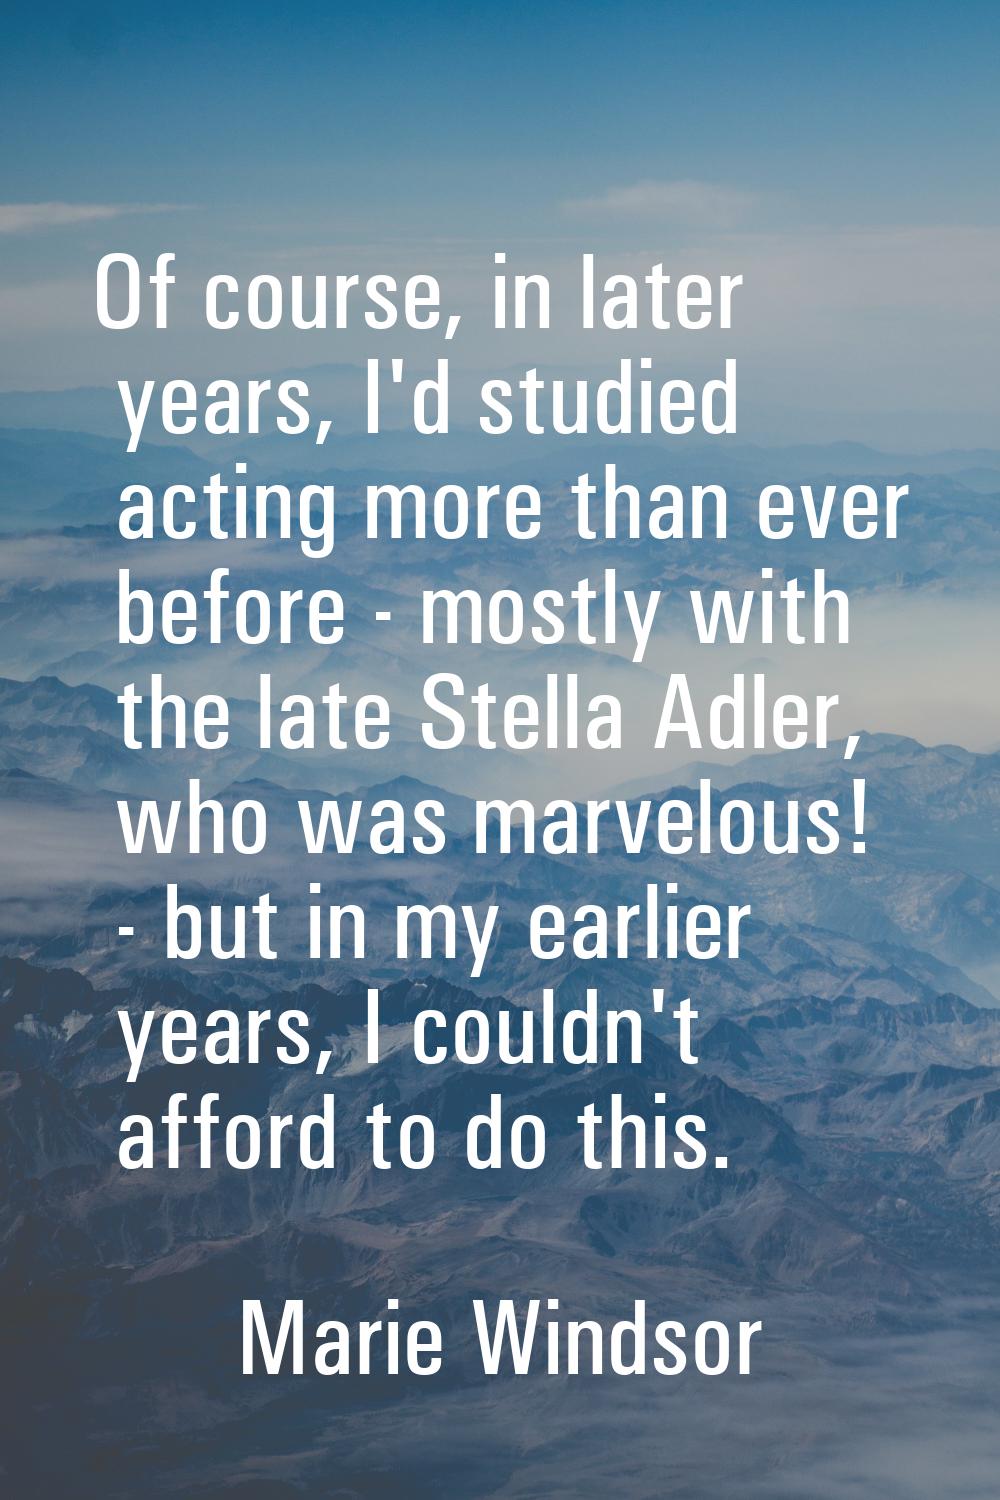 Of course, in later years, I'd studied acting more than ever before - mostly with the late Stella A